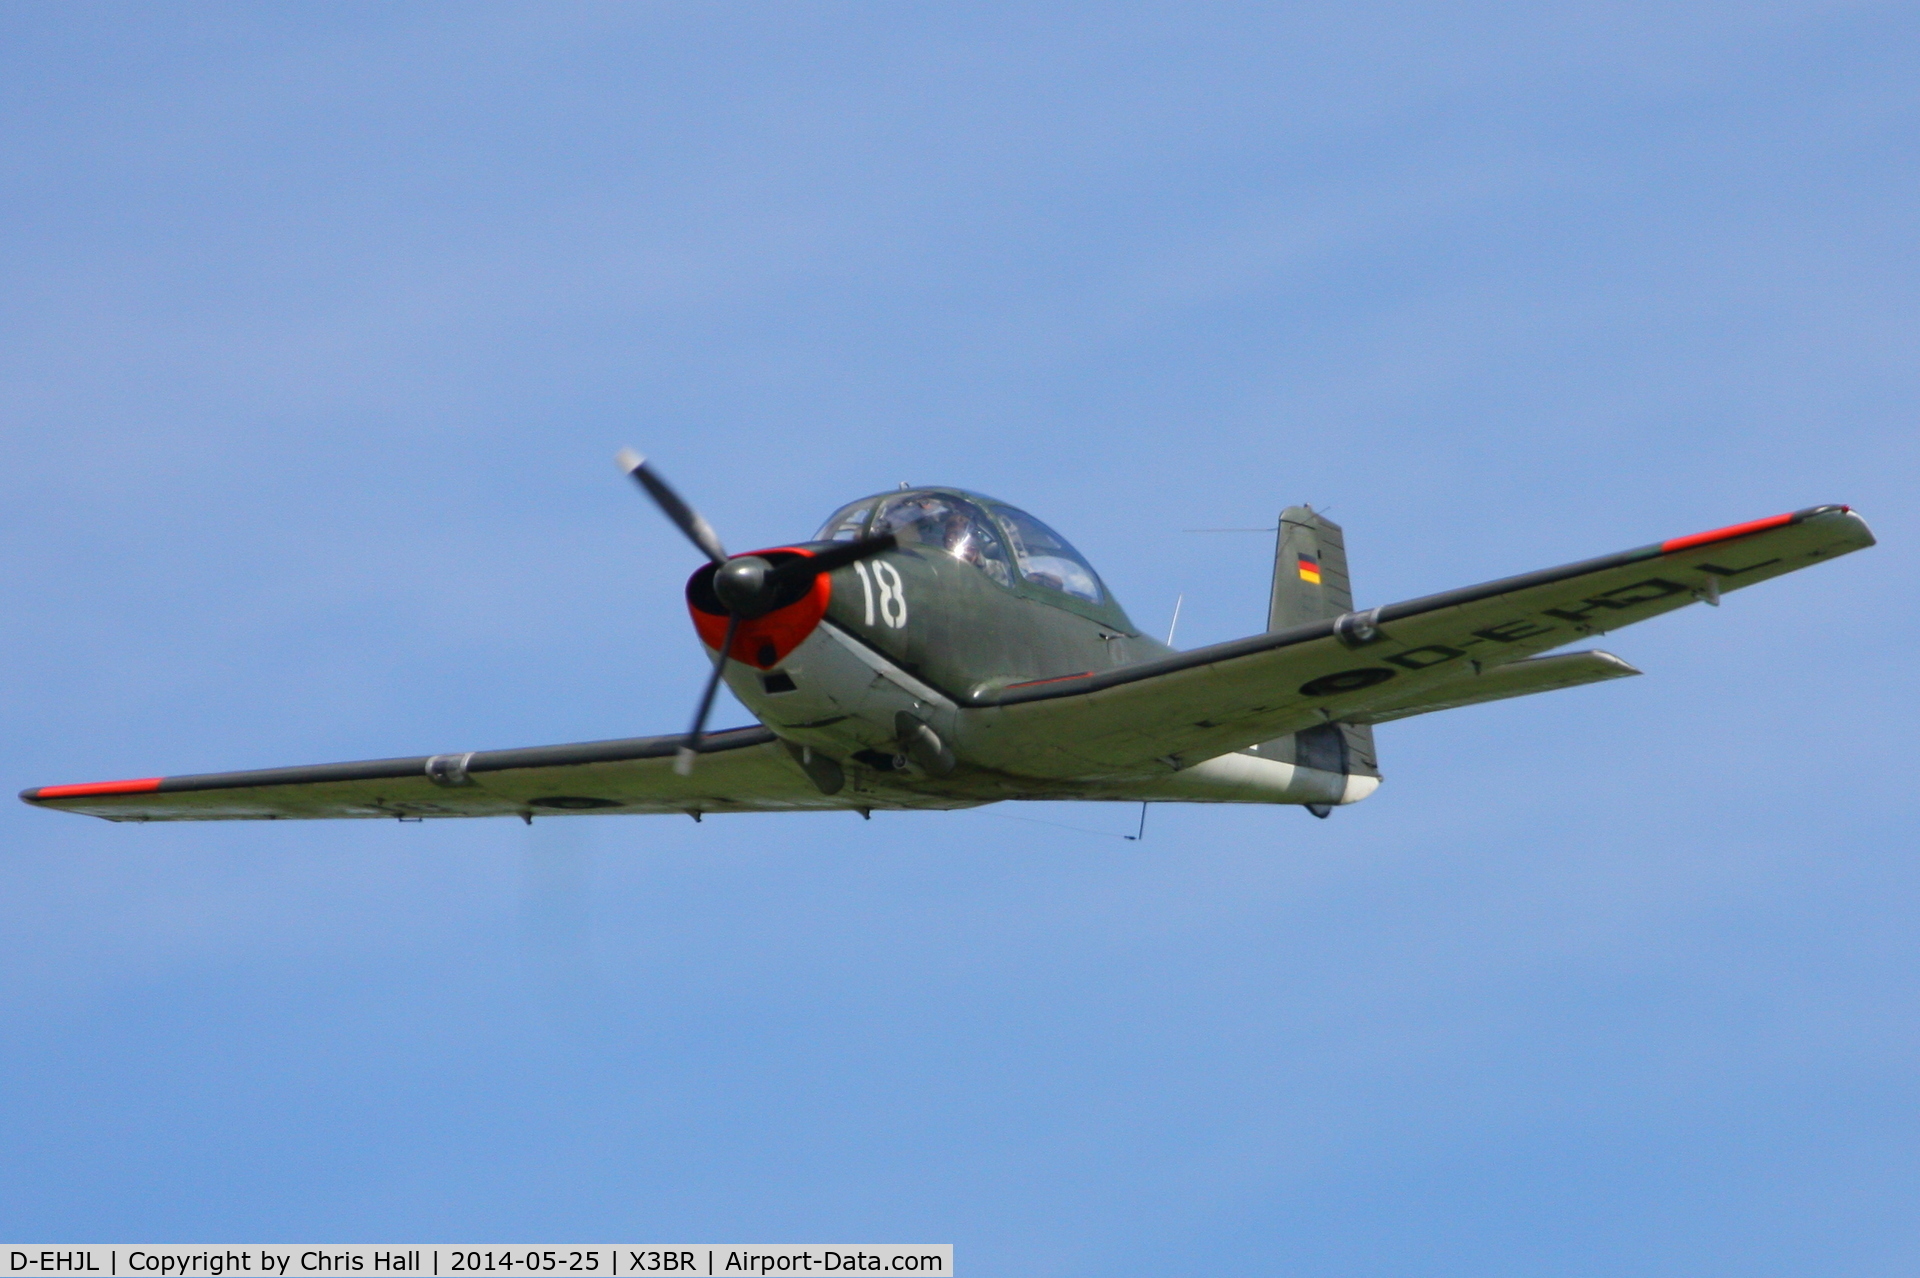 D-EHJL, Focke-Wulf FWP-149D C/N 45, visitor at the Cold War Jets Open Day 2014